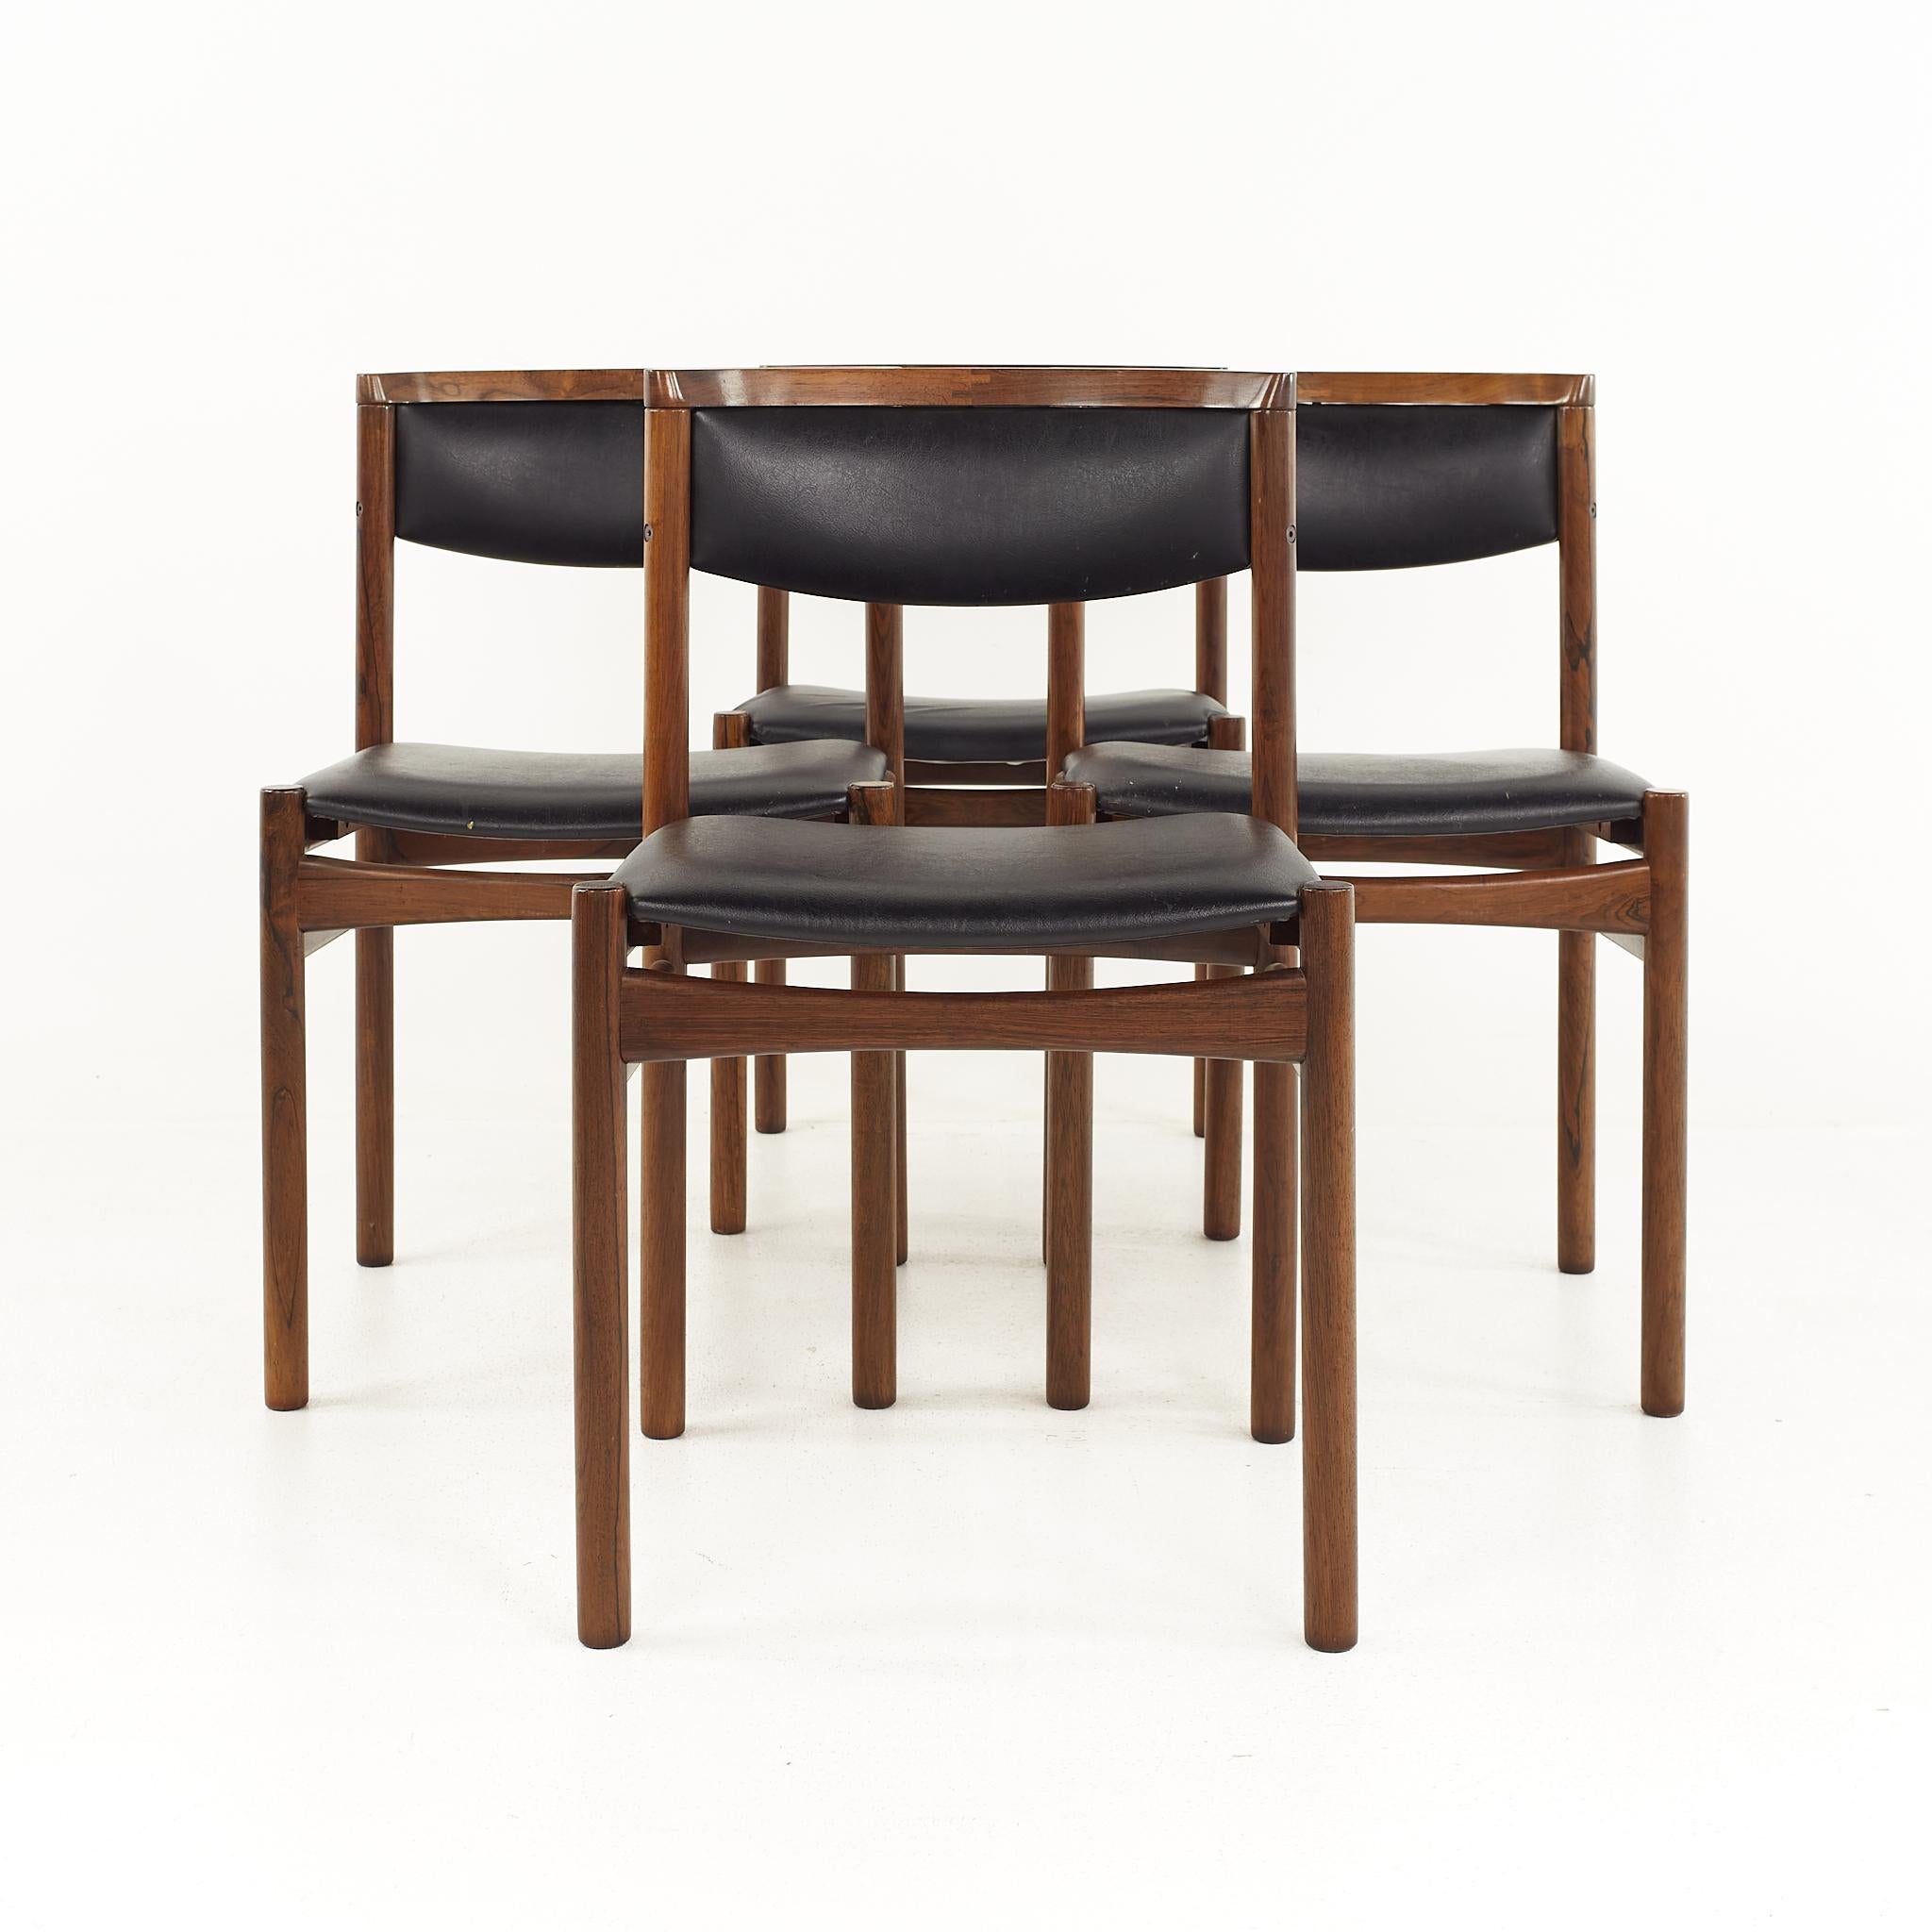 Sax Mobler mid century danish rosewood dining chairs - set of 4

Each chair measures: 18.75 wide x 17.5 deep x 30 high, with a seat height of 18 inches

All pieces of furniture can be had in what we call restored vintage condition. That means